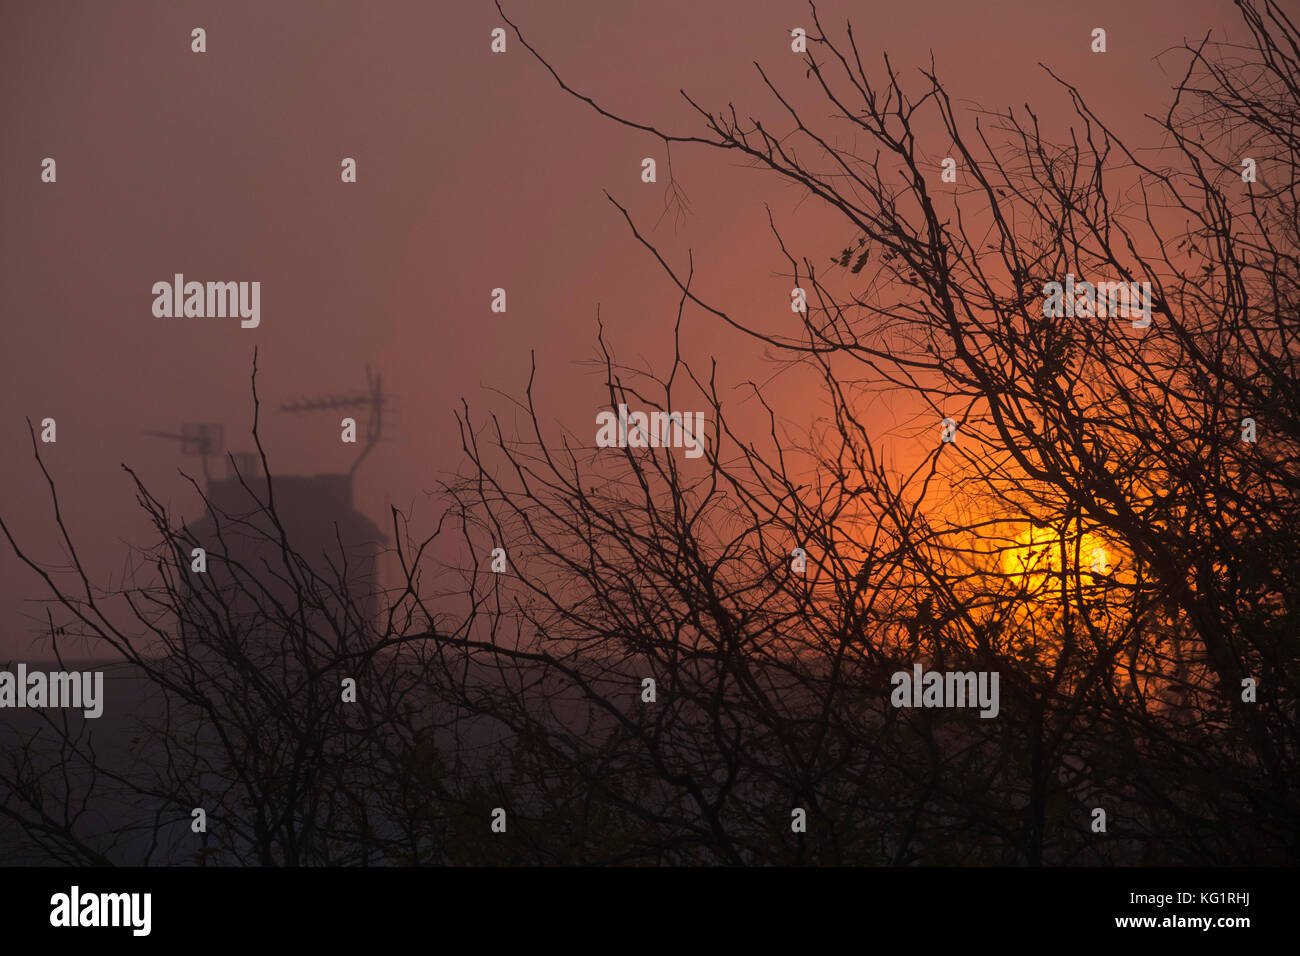 London Borough of Merton, UK. 3 November, 2017. A thick bank of fog approaches Morden as rush hour begins, creating a dramatic orange sunrise. Credit: Malcolm Park/Alamy live News. Stock Photo